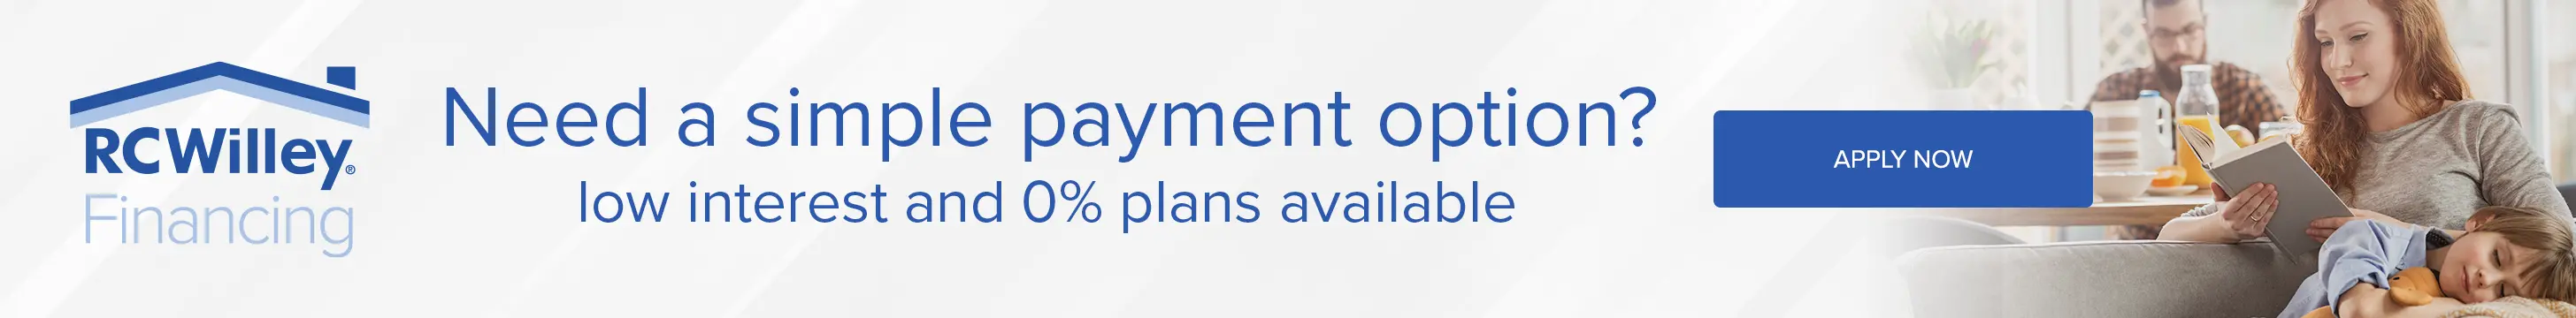 Need a simple payment option? Low interest and 0% plans available. Apply Now